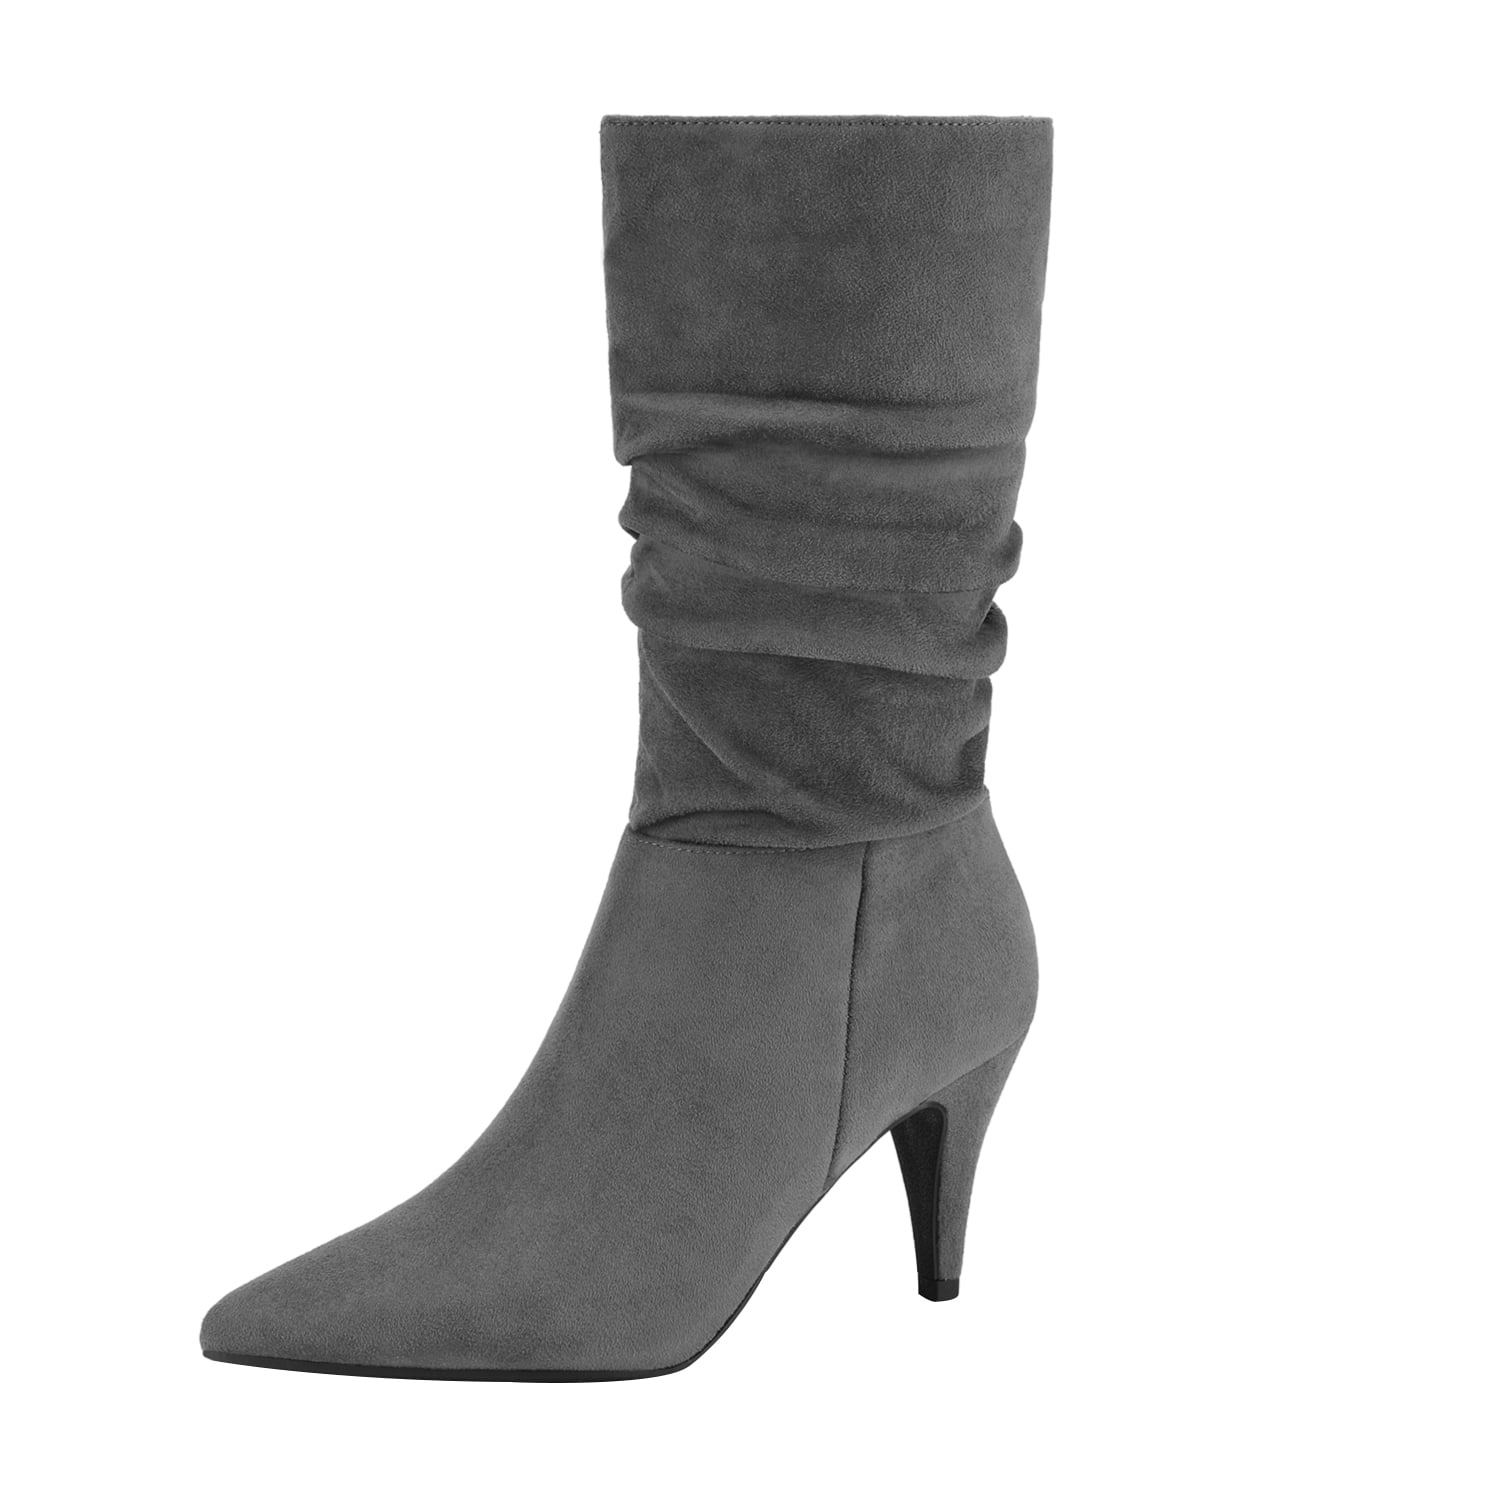 Dream Pairs Women's Fashion Pointed Toe Mid Calf Boots Stiletto